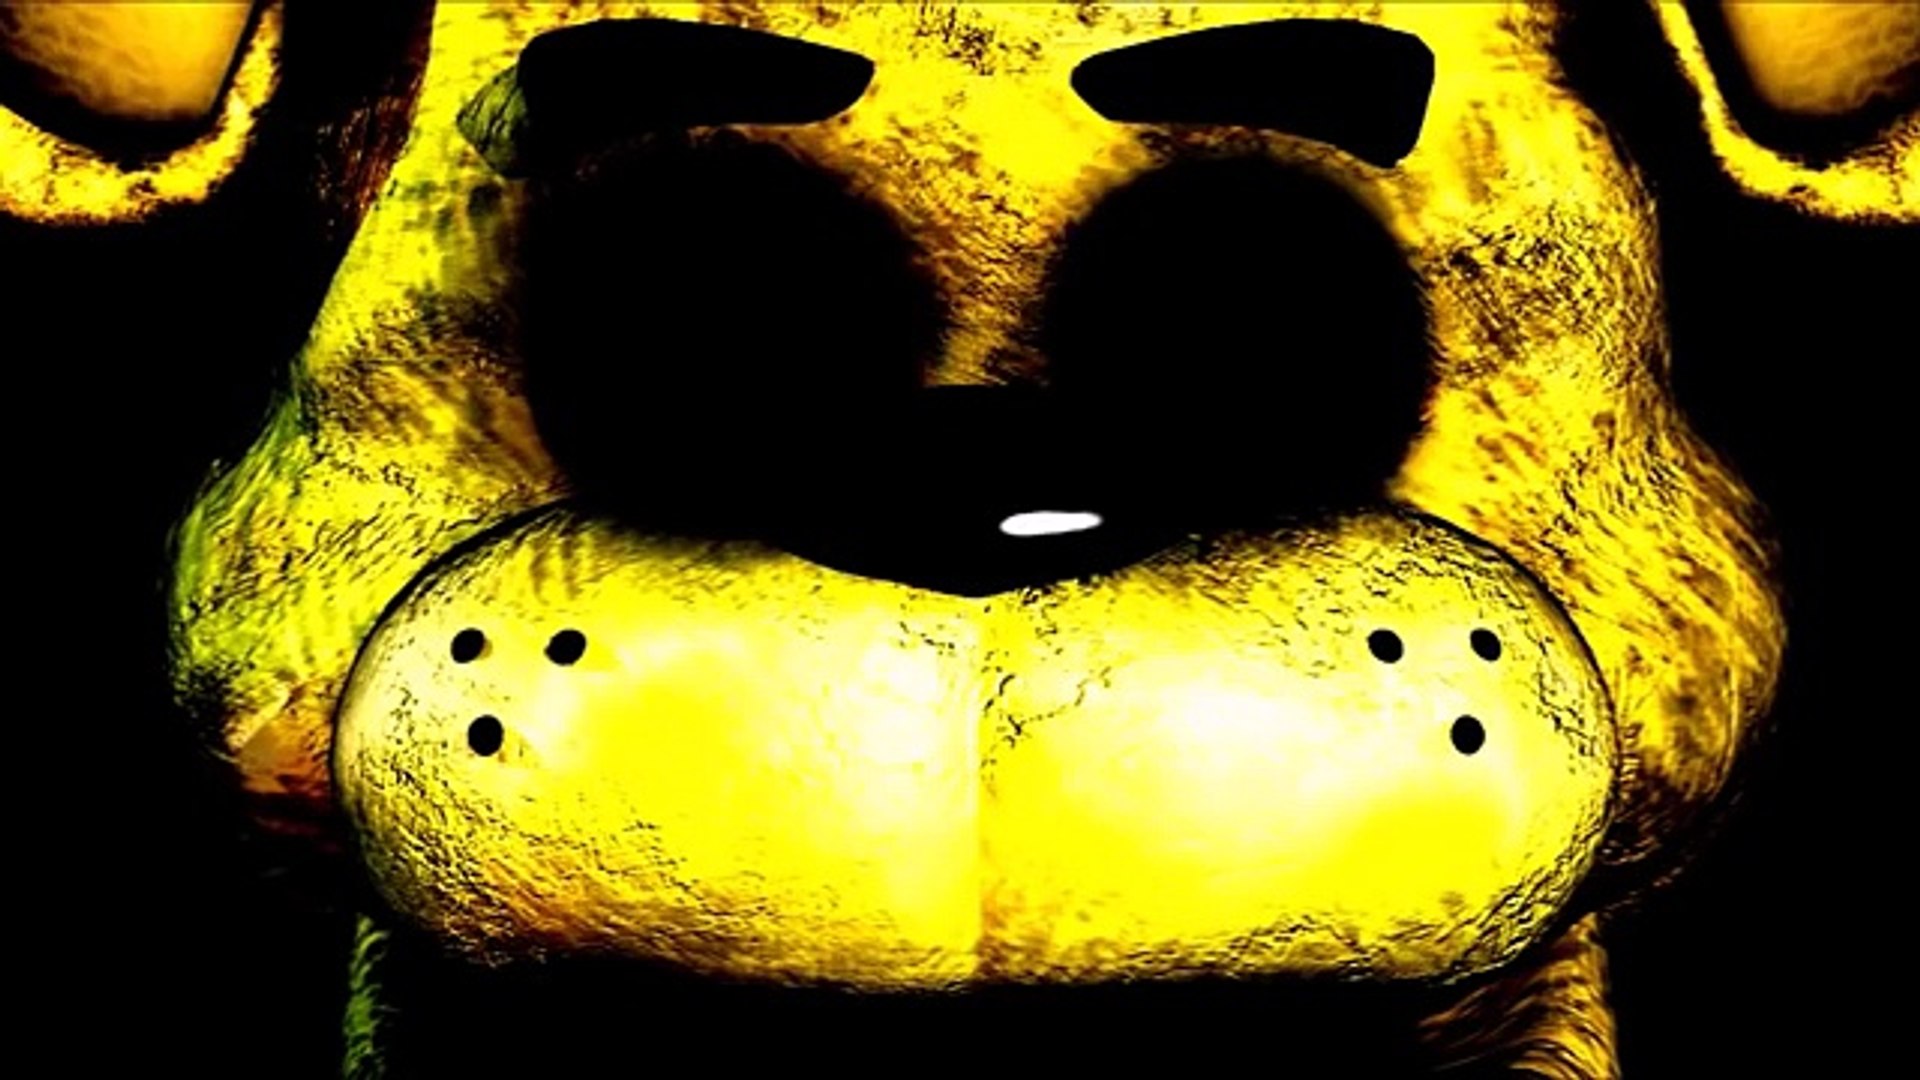 five nights at freddys all jumpscares